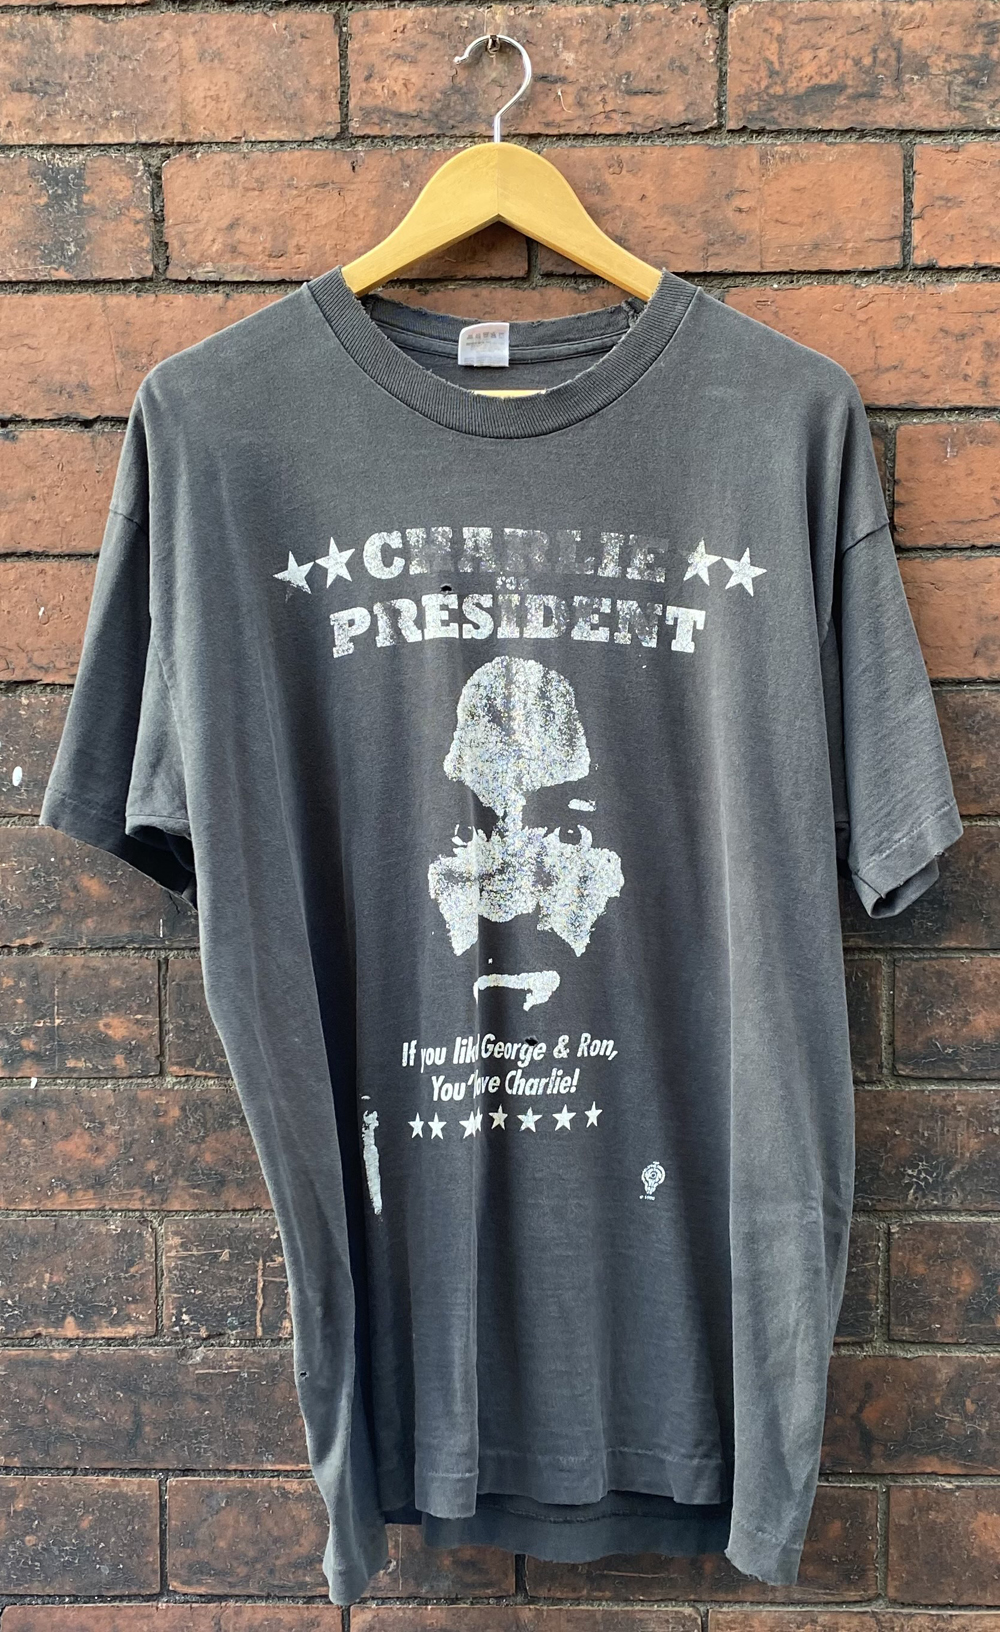 Vintage 1990s Charlie For President T-Shirt If you Liked George & Ron You'll Love Charlie